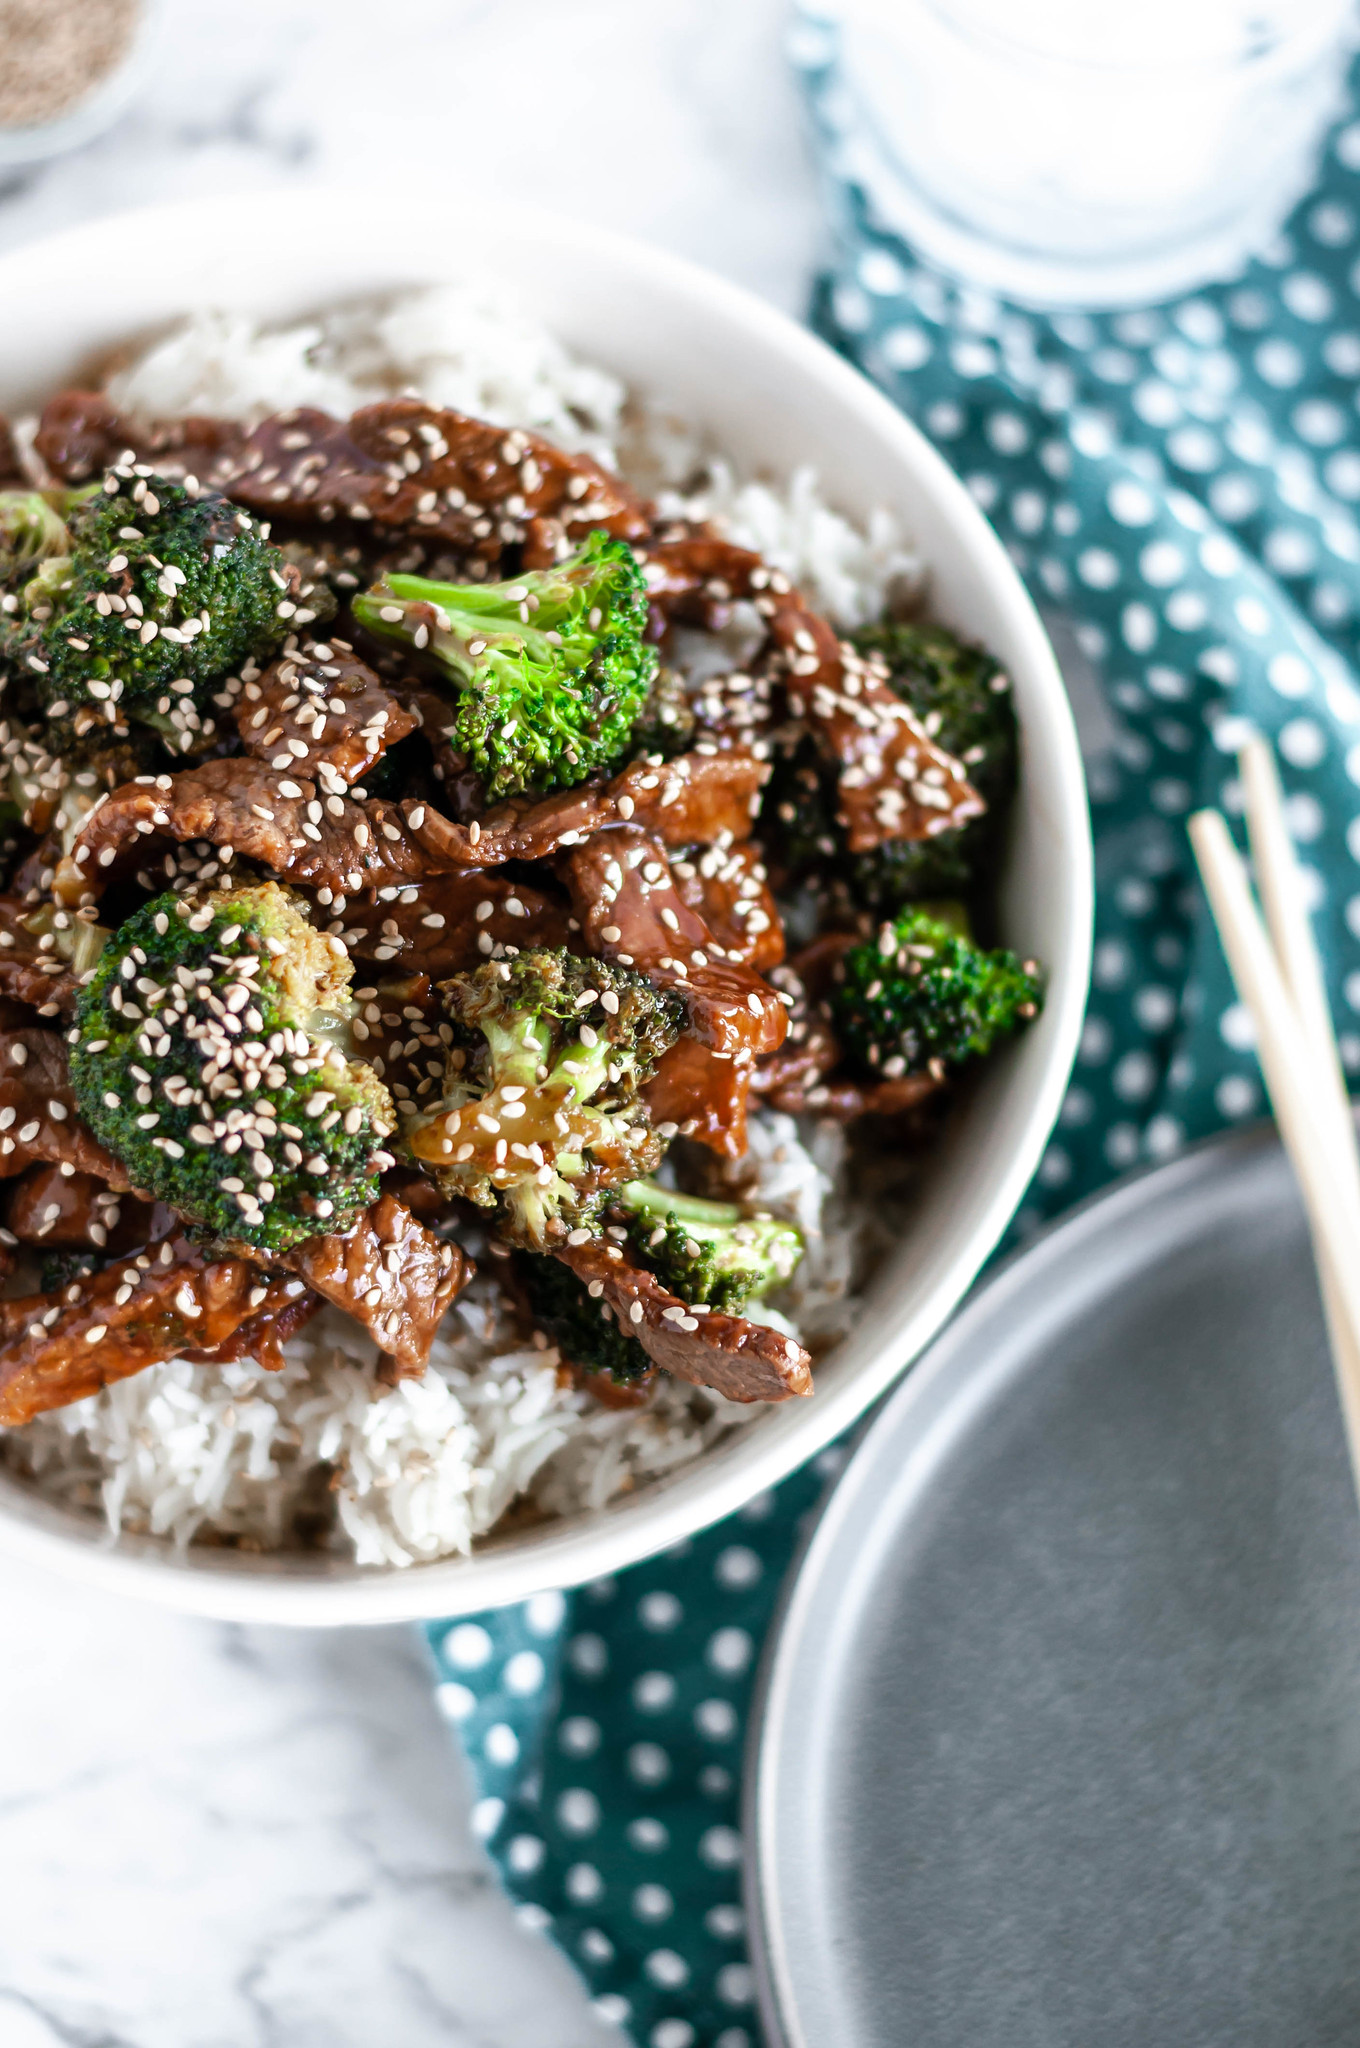 Sesame Beef and Broccoli is super simple and packed full of flavor. Perfect for weeknight dinners since it's done in less than 30 minutes.